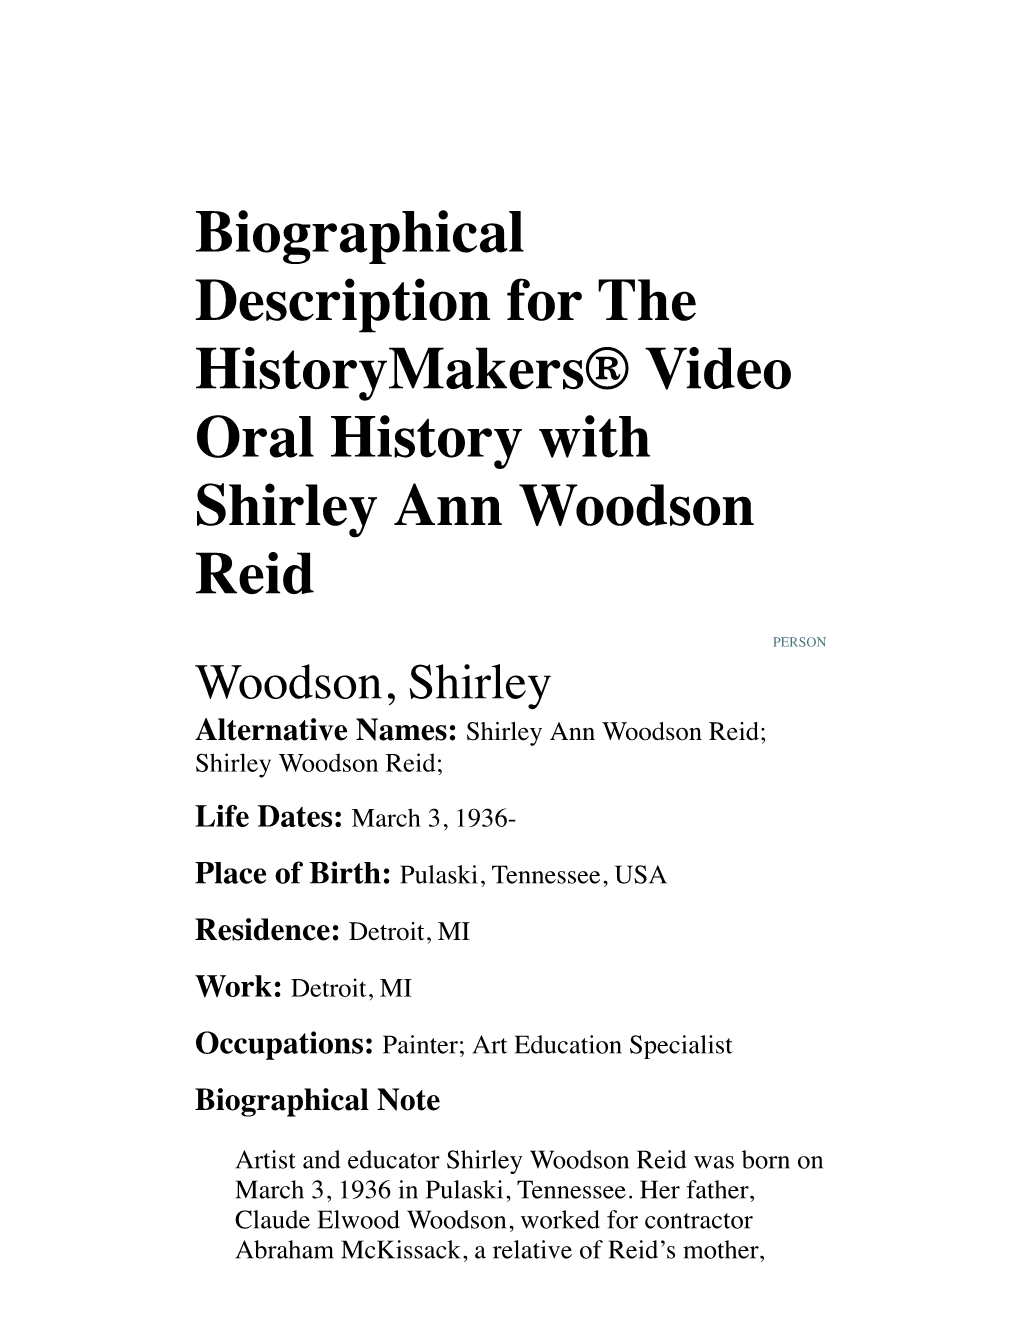 Biographical Description for the Historymakers® Video Oral History with Shirley Ann Woodson Reid